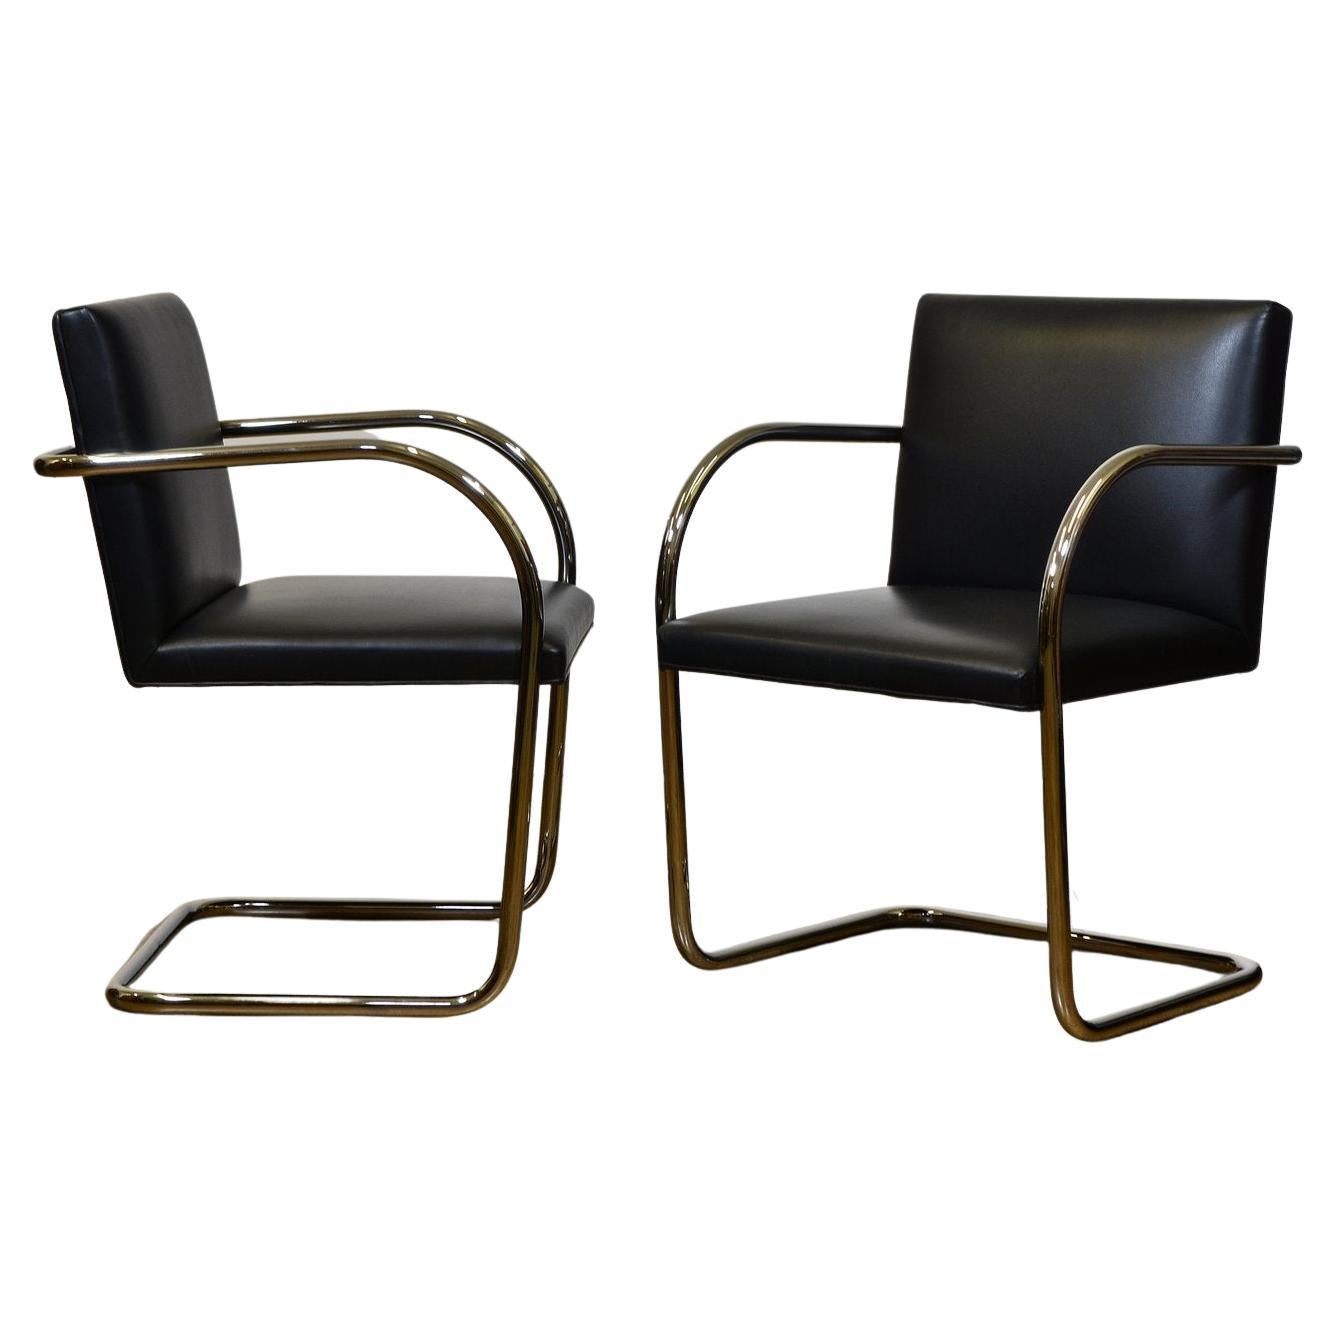 Pair of Mies Van Der Rohe Tubular Chrome Black Leather Brno Chairs by Knoll 1980